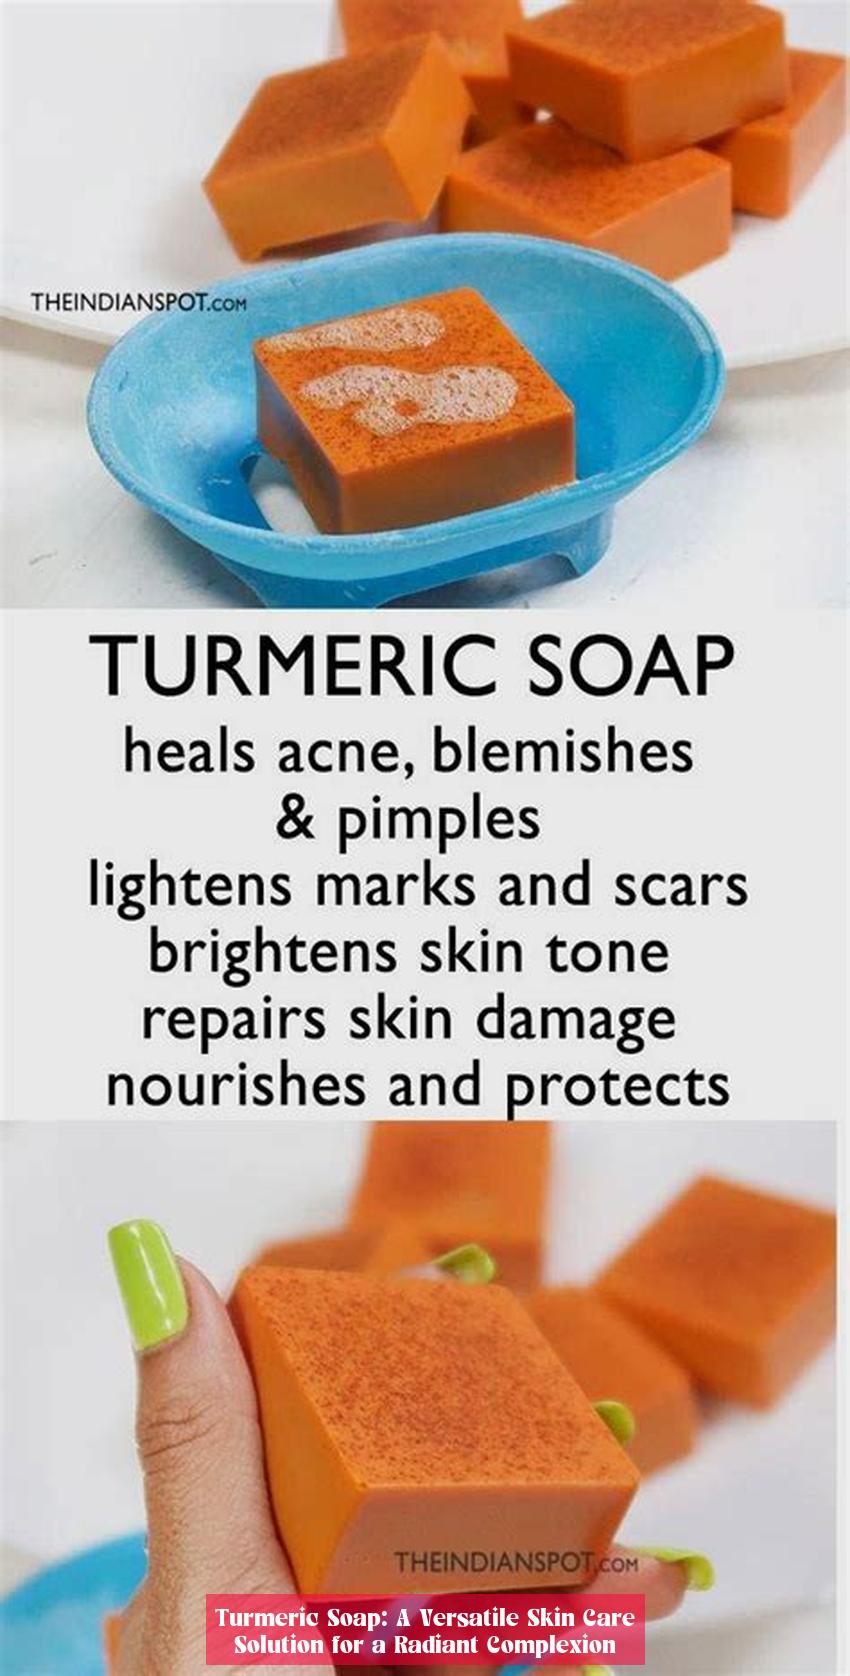 Turmeric Soap: A Versatile Skin Care Solution for a Radiant Complexion